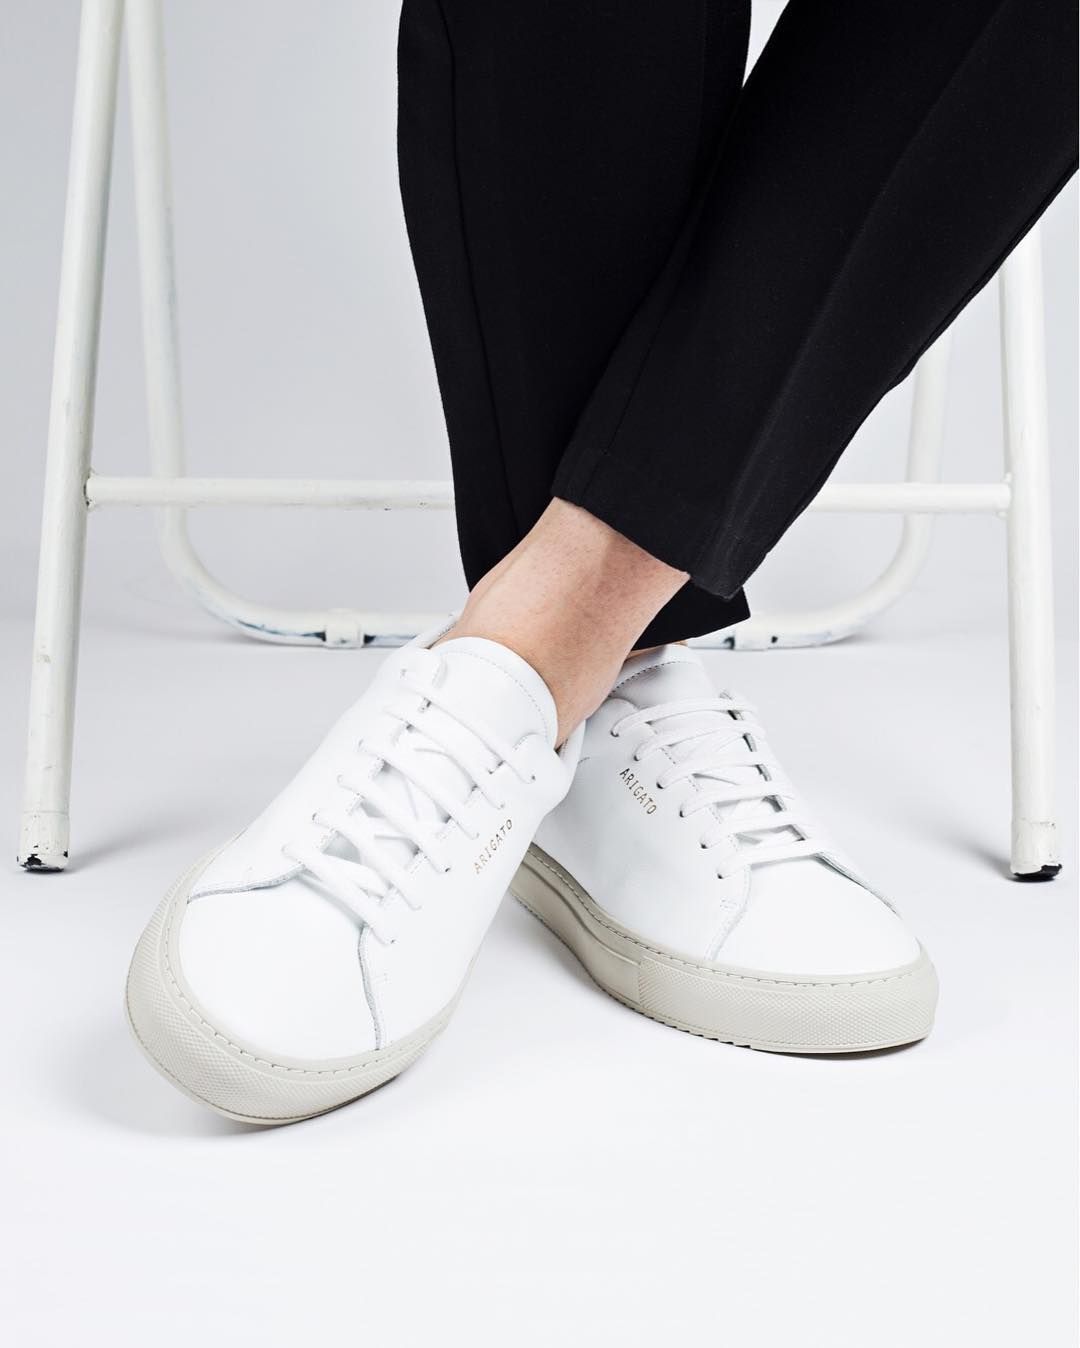 How to Wear White Shoes with Black Jeans